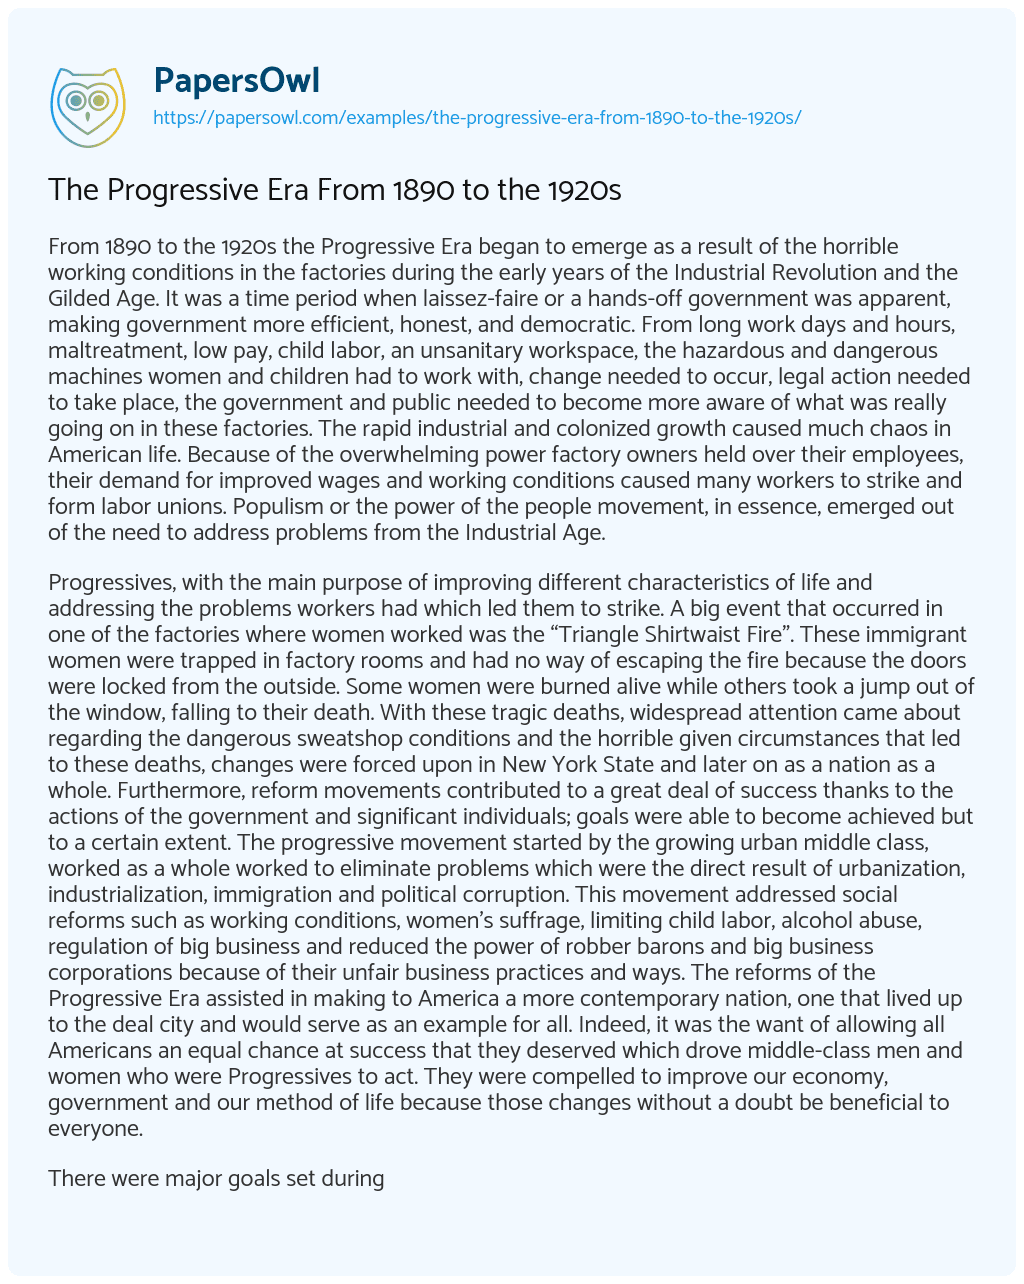 Essay on The Progressive Era from 1890 to the 1920s